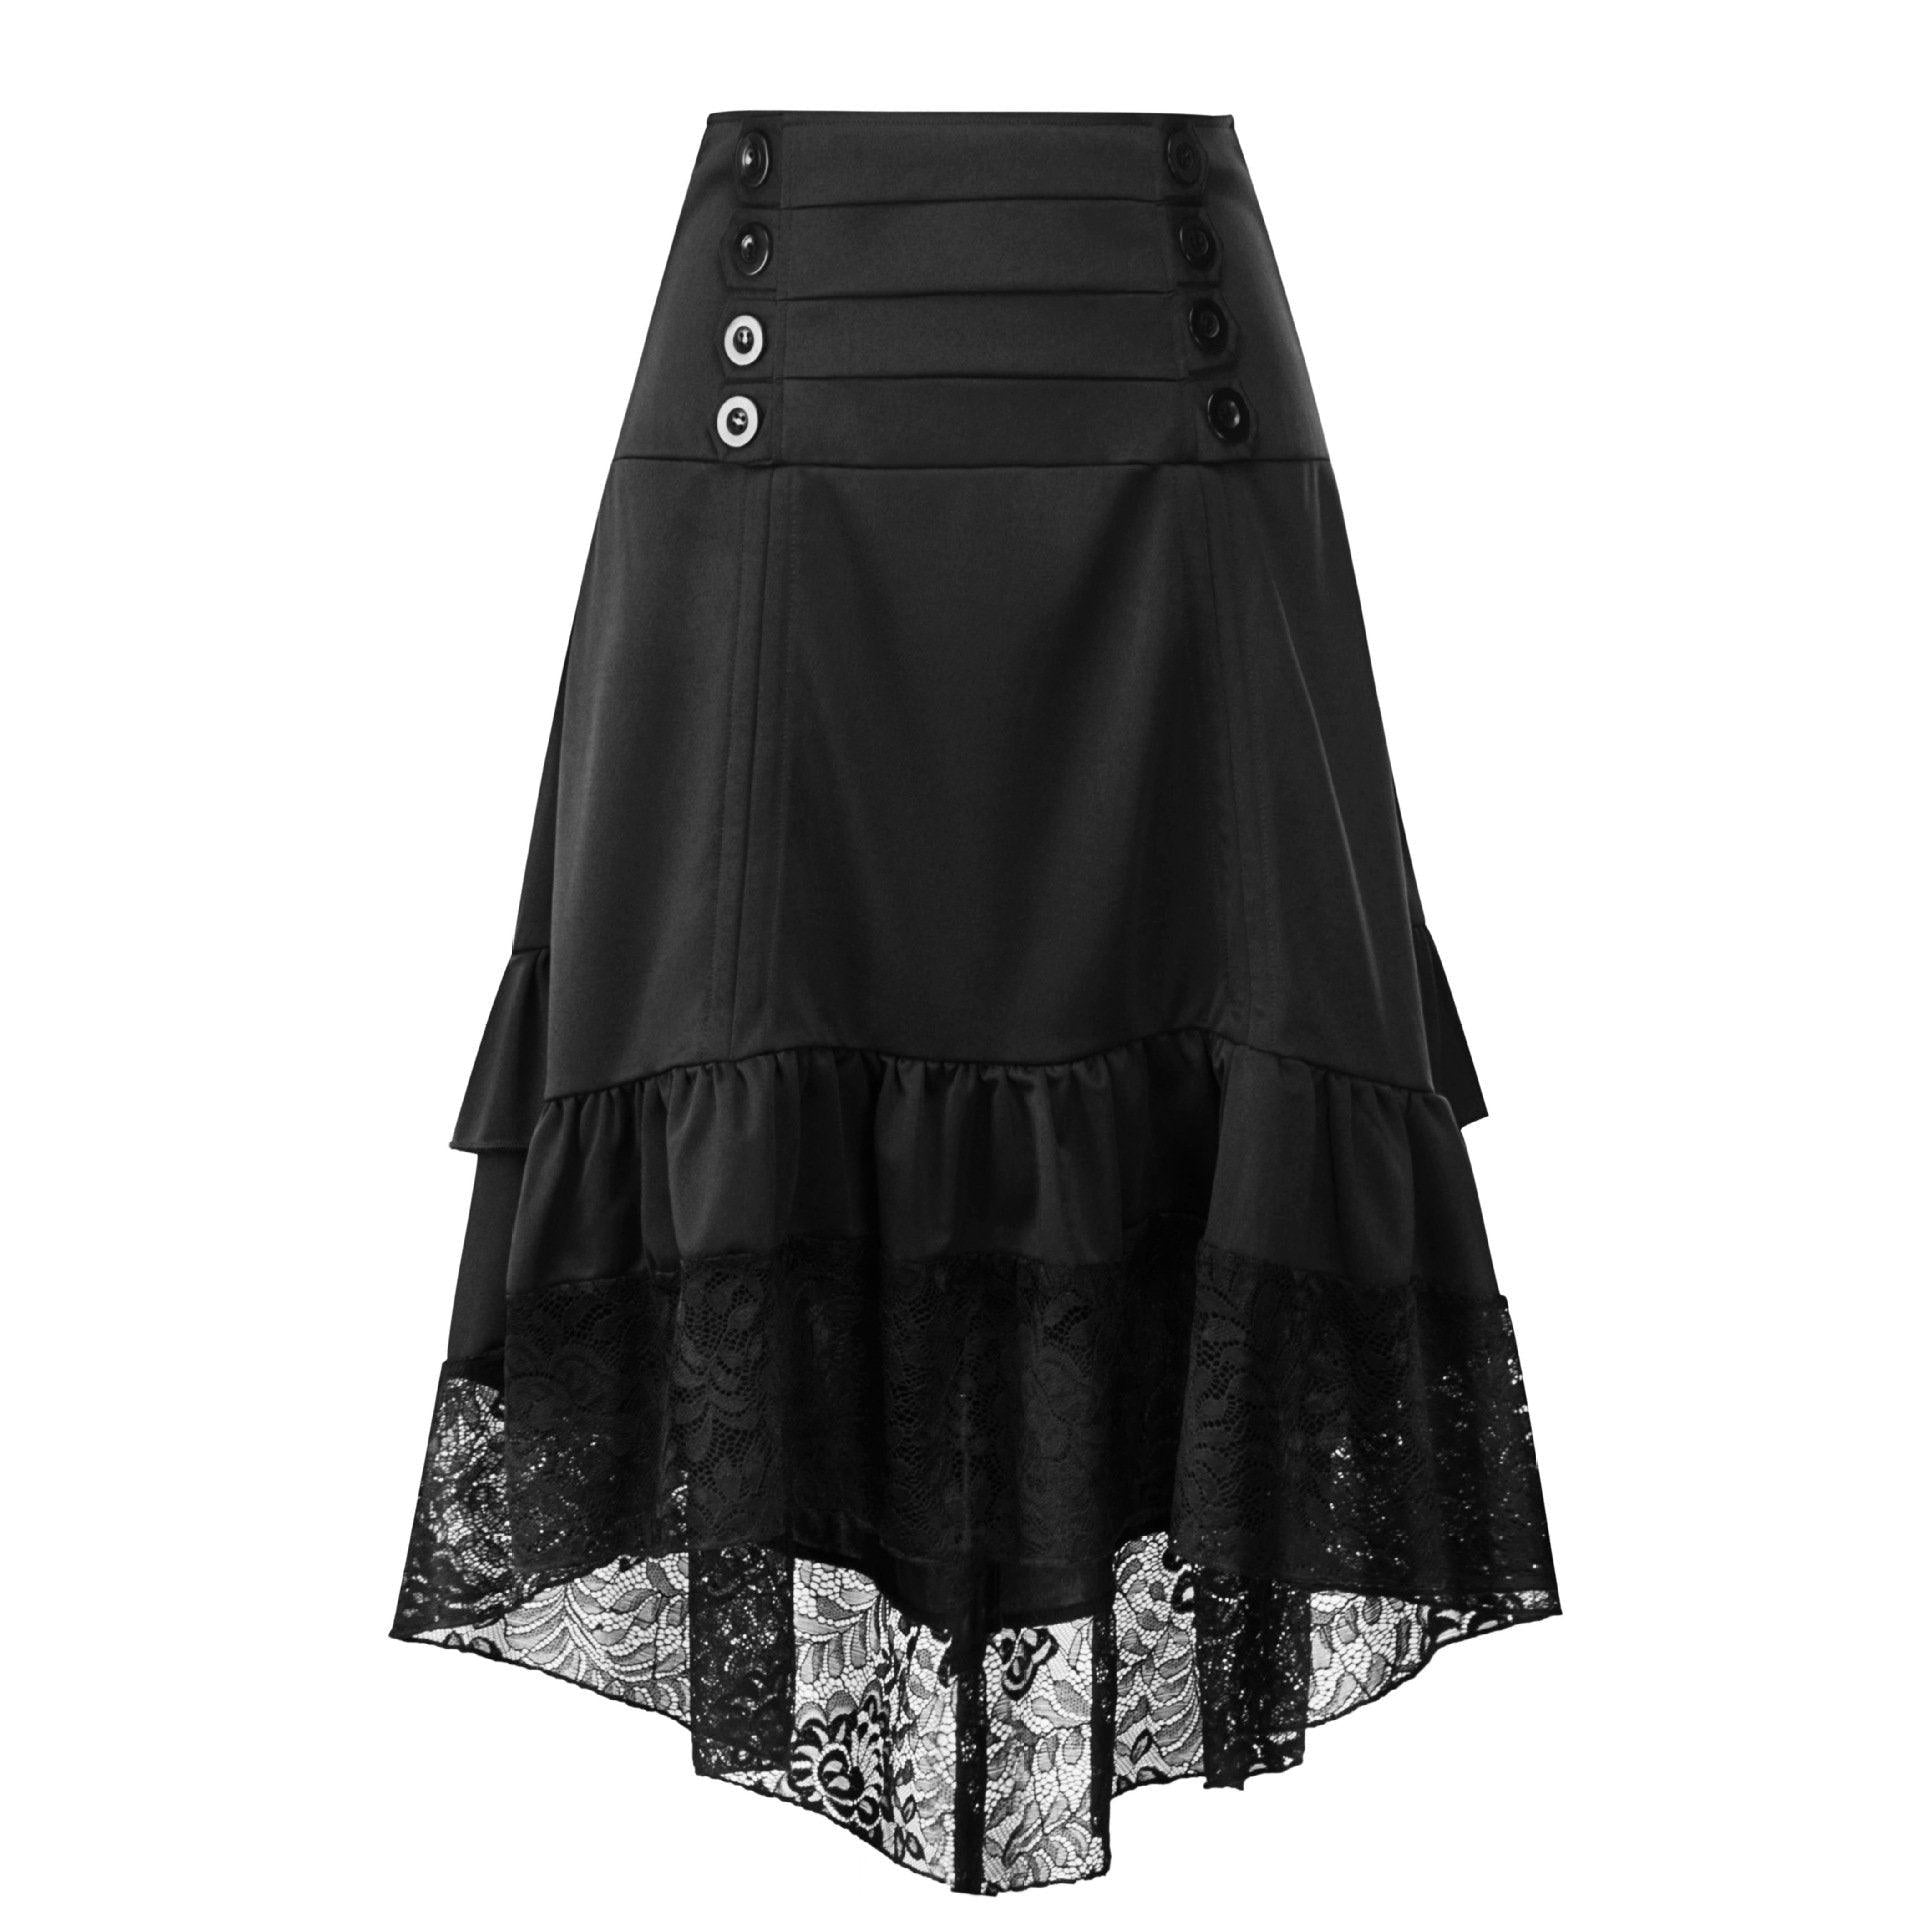 Irregular Lace Skirt - GothBB 2022 free shipping available